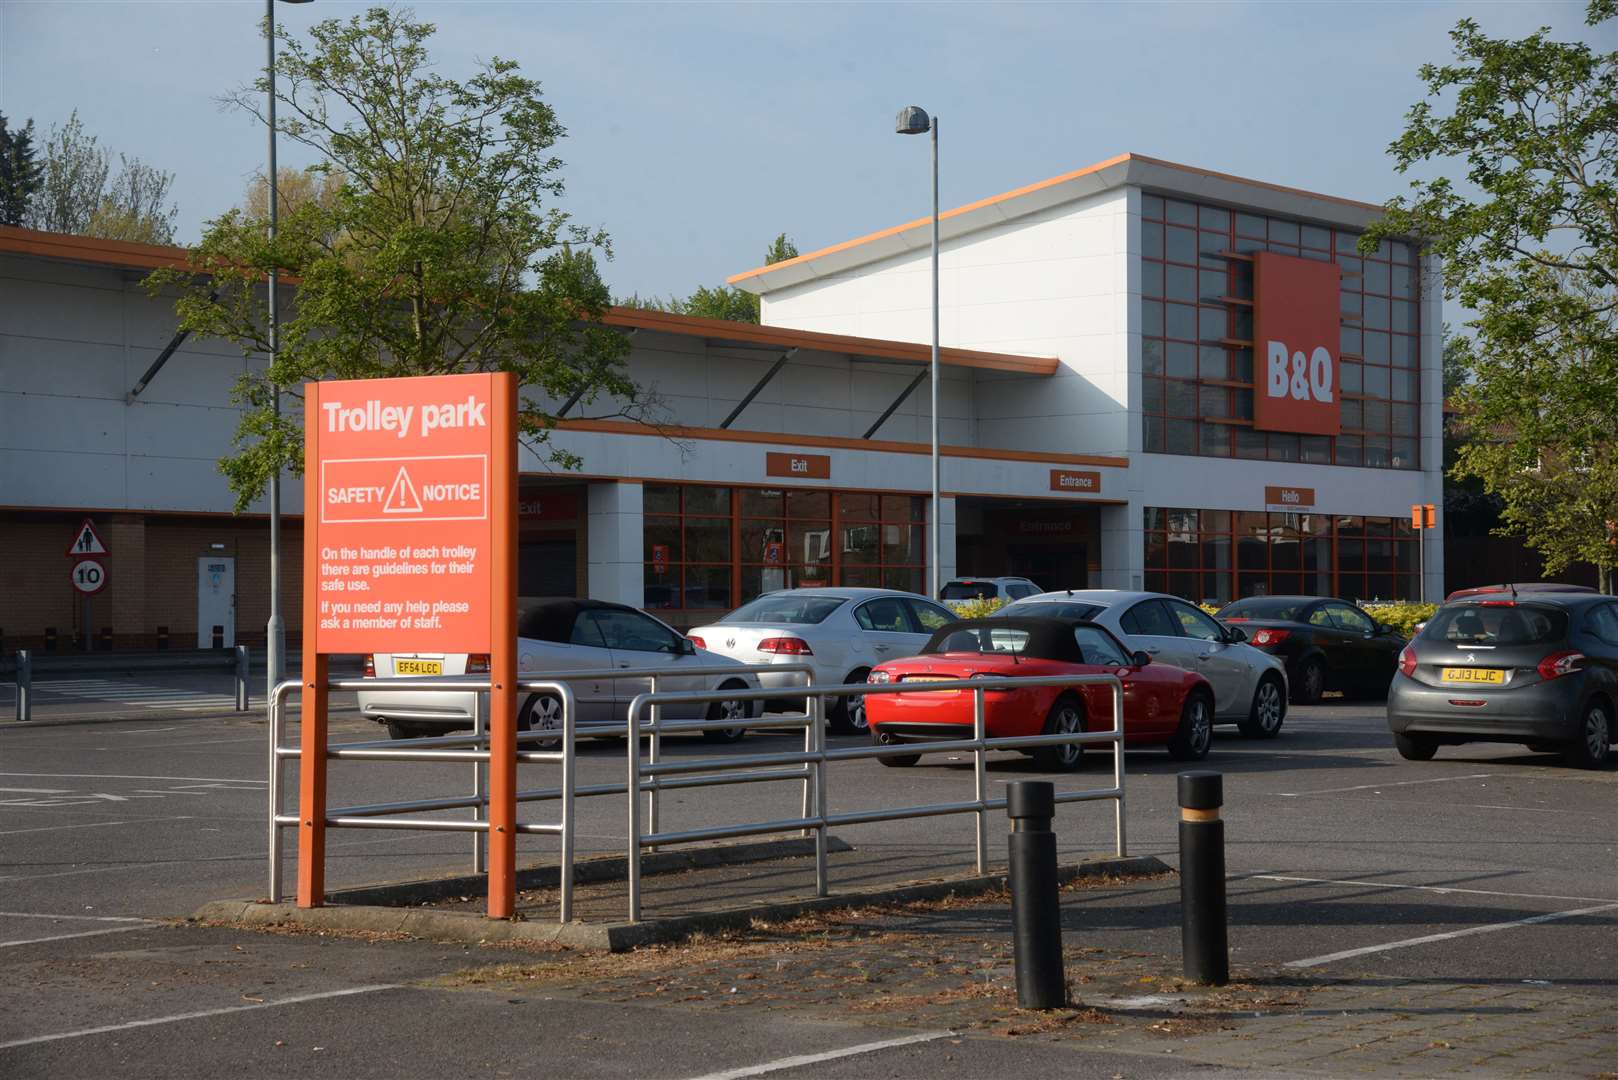 The B&Q store in Sturry Road is now downsized